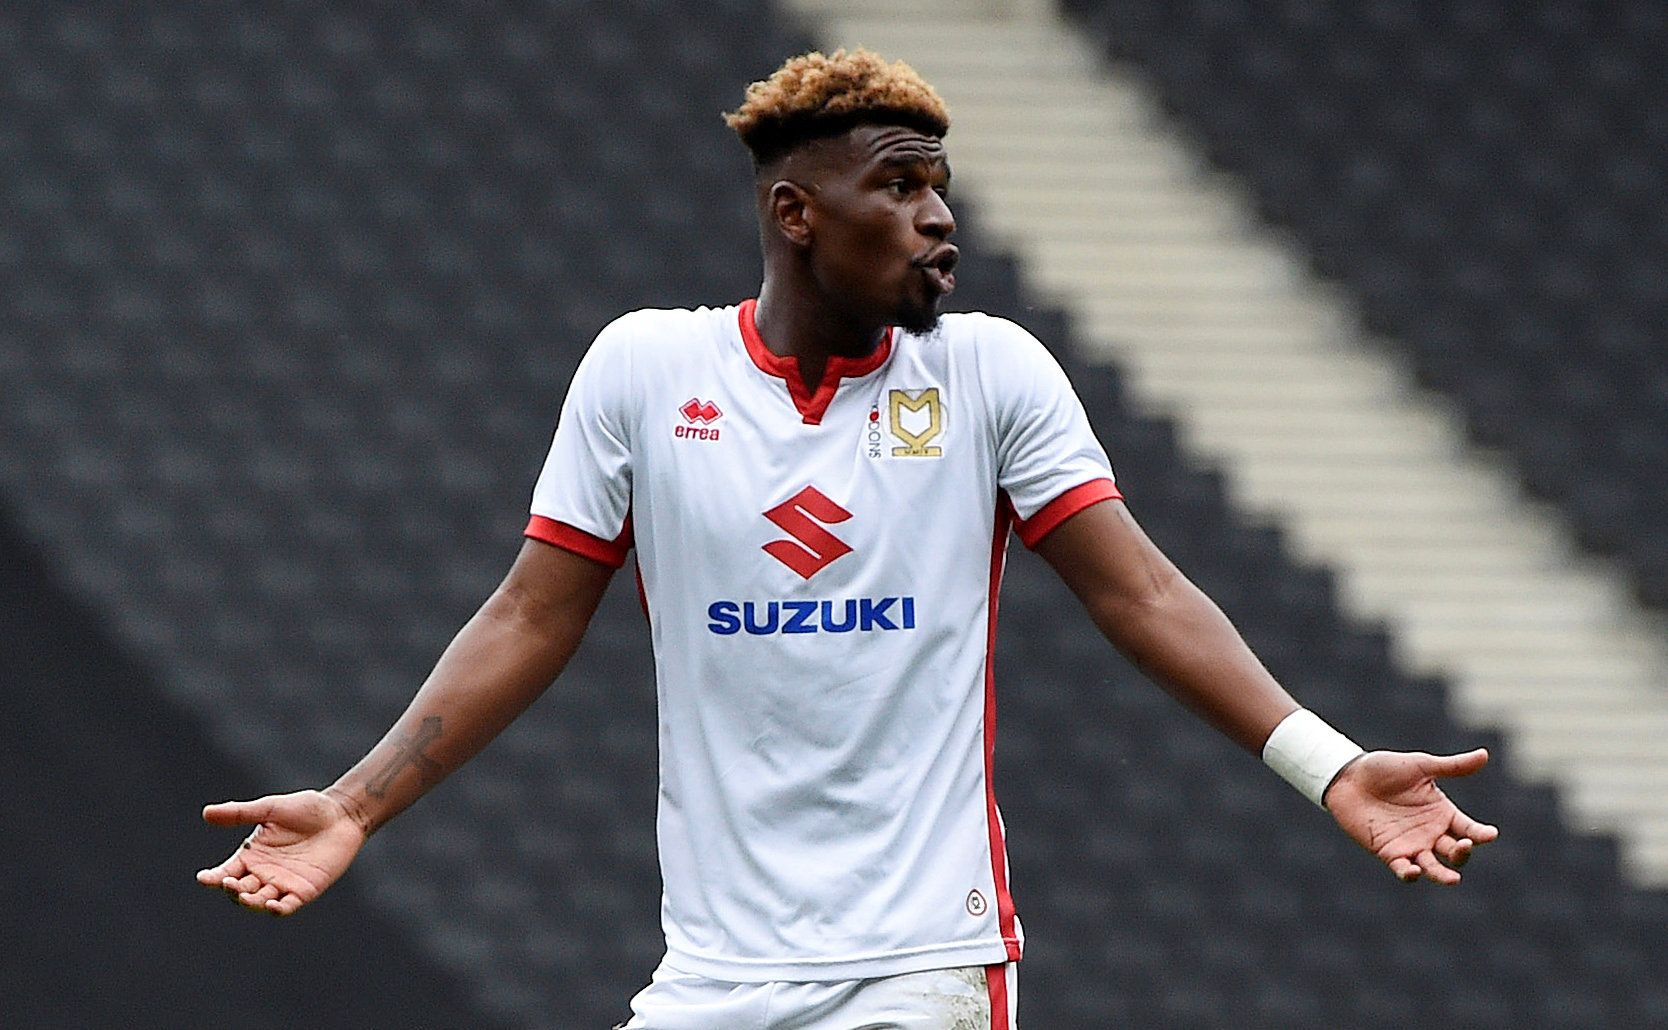 Soccer Football - League One - Milton Keynes Dons vs Bradford City - Stadium MK, Milton Keynes, Britain - October 7, 2017  MK Dons' Aaron Tshibola protests after being sent off   Action Images/Alan Walter EDITORIAL USE ONLY. No use with unauthorized audio, video, data, fixture lists, club/league logos or 